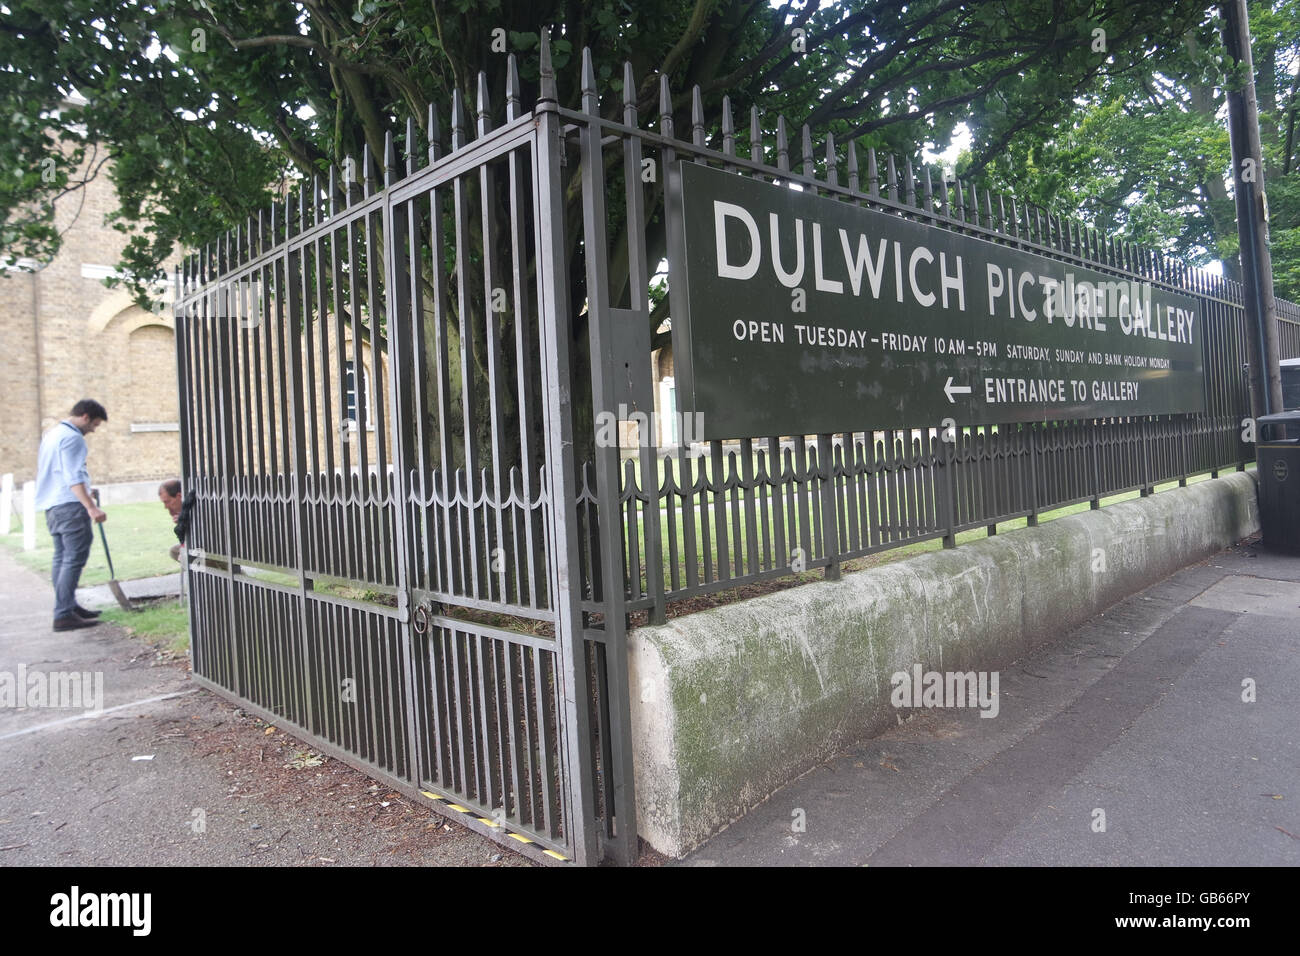 Dulwich village, land mark , Dulwich picture gallery , Stock Photo